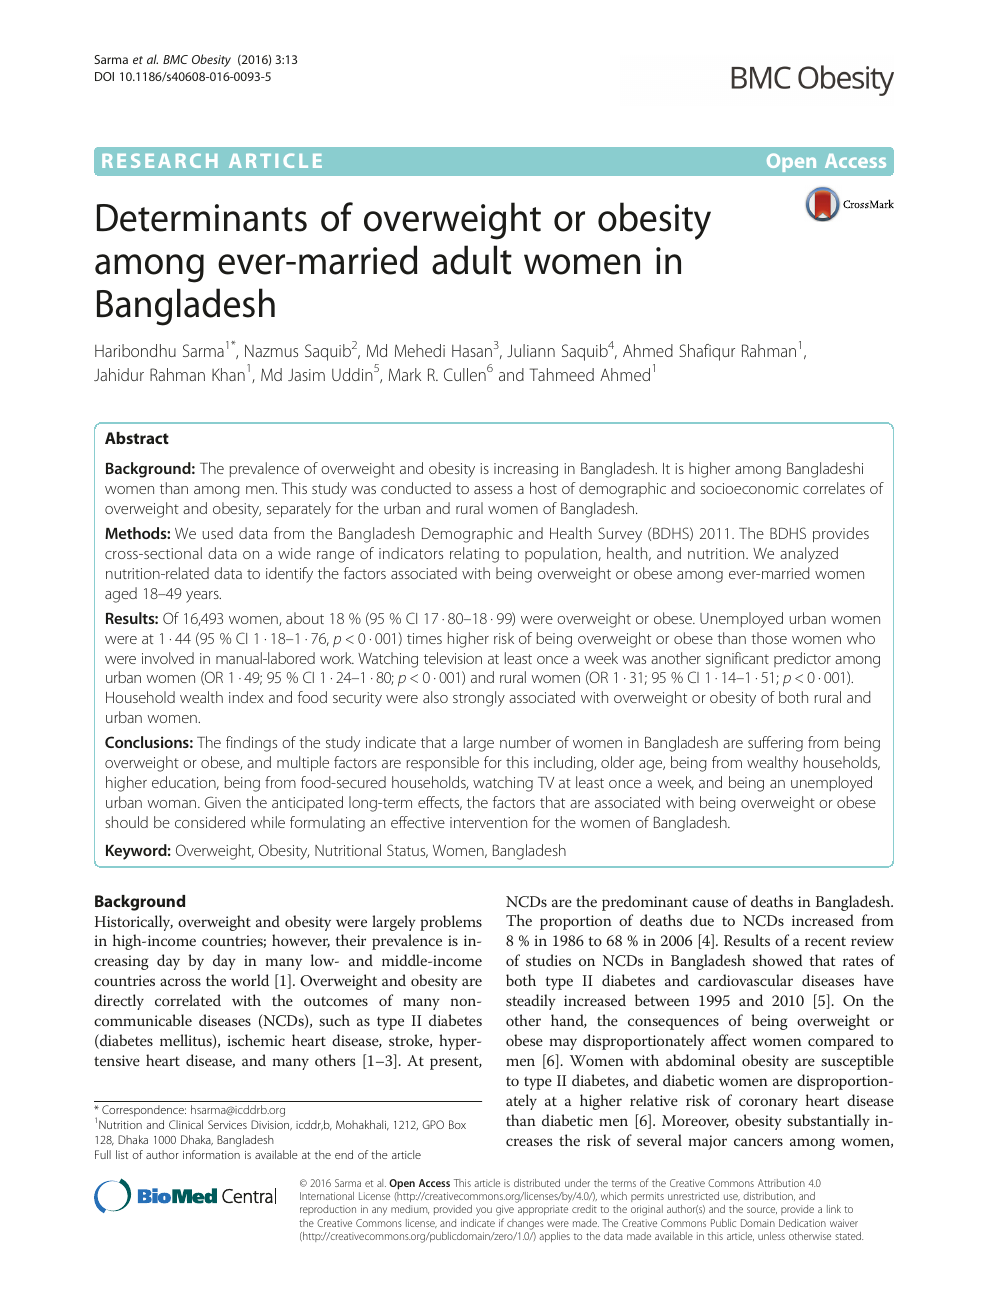 Determinants of overweight or obesity among ever-married adult women in Bangladesh image